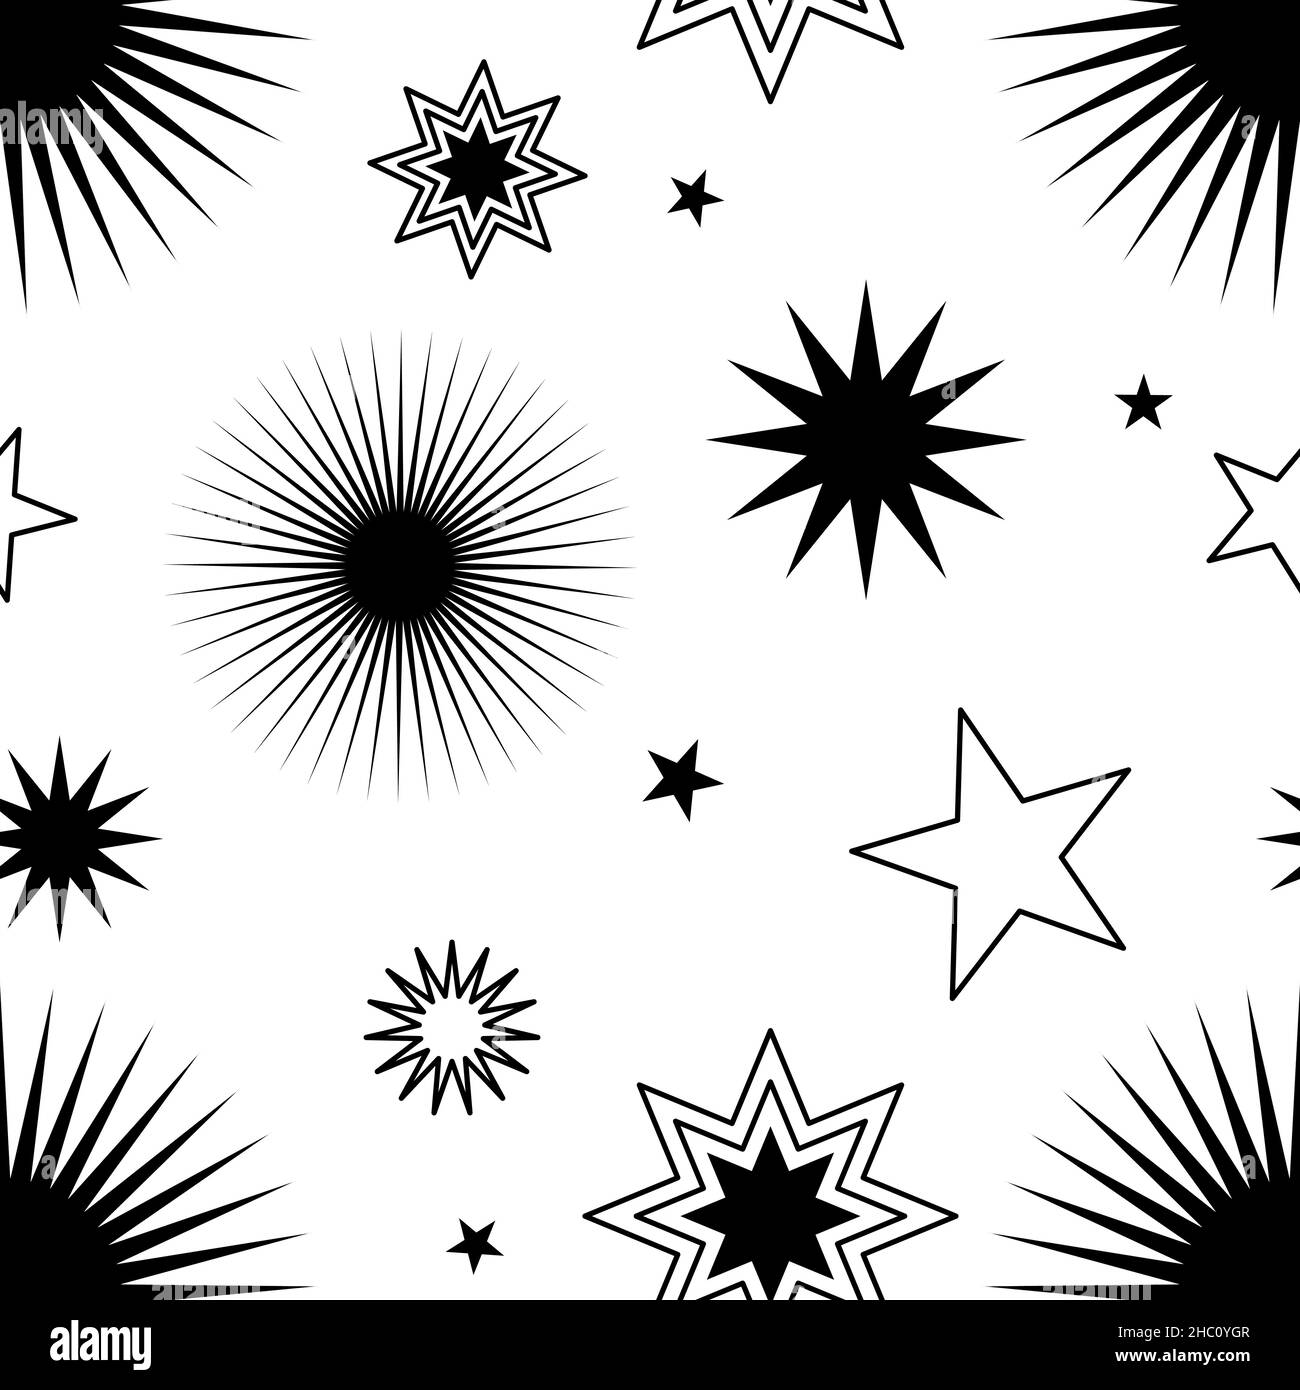 Seamless stars pattern. Simple fun celestial background. Abstract star shapes for sky illustration. Spiritual boho vibes Stock Vector